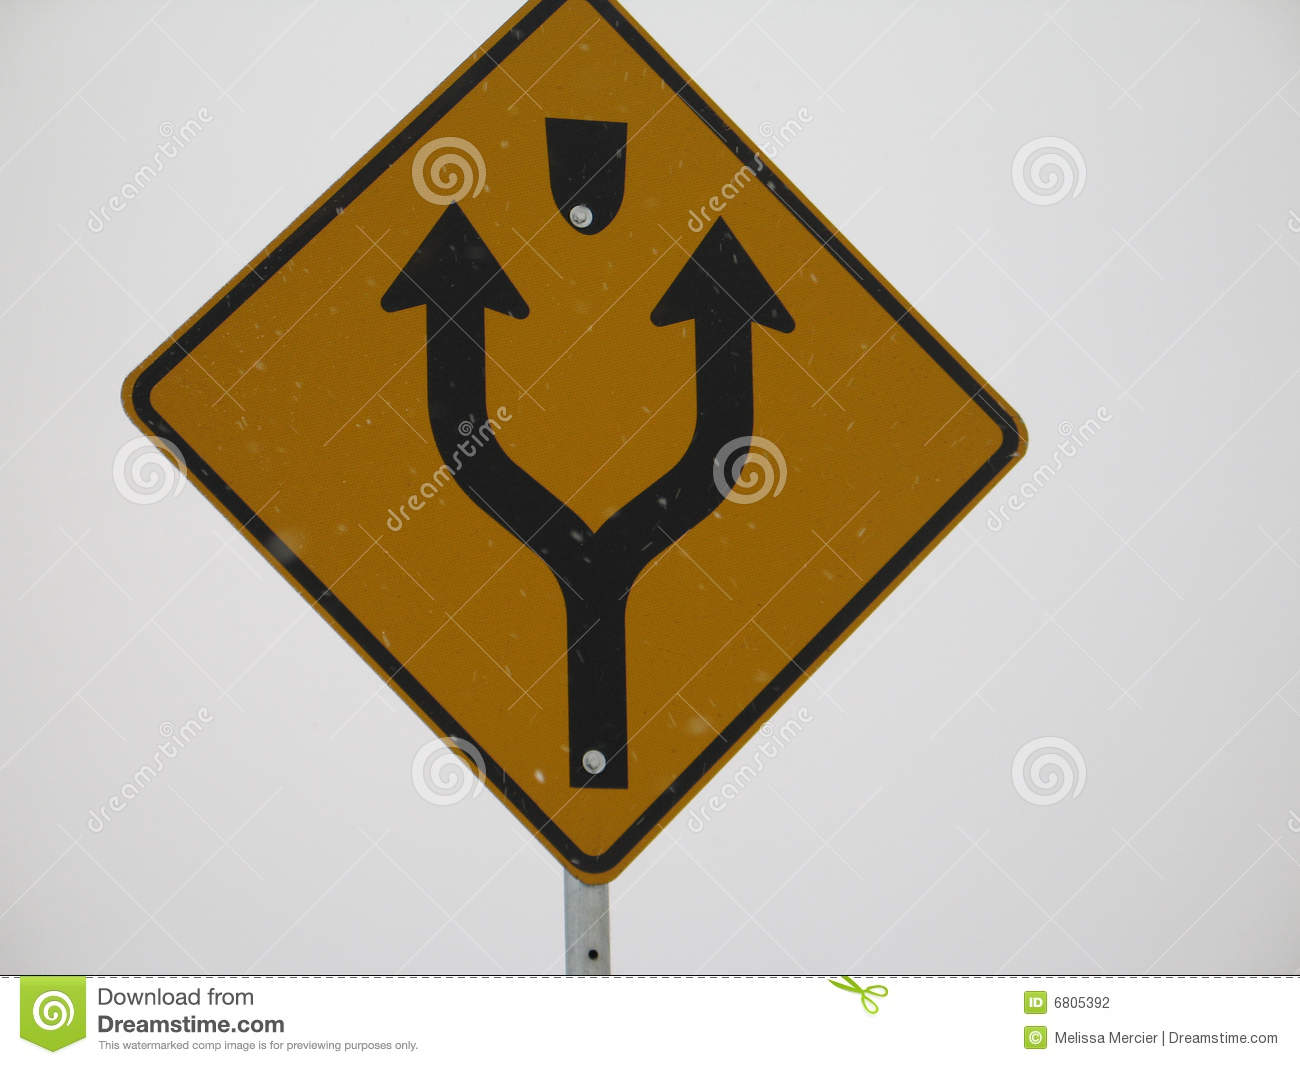 Split Road Sign Stock Photography   Image  6805392